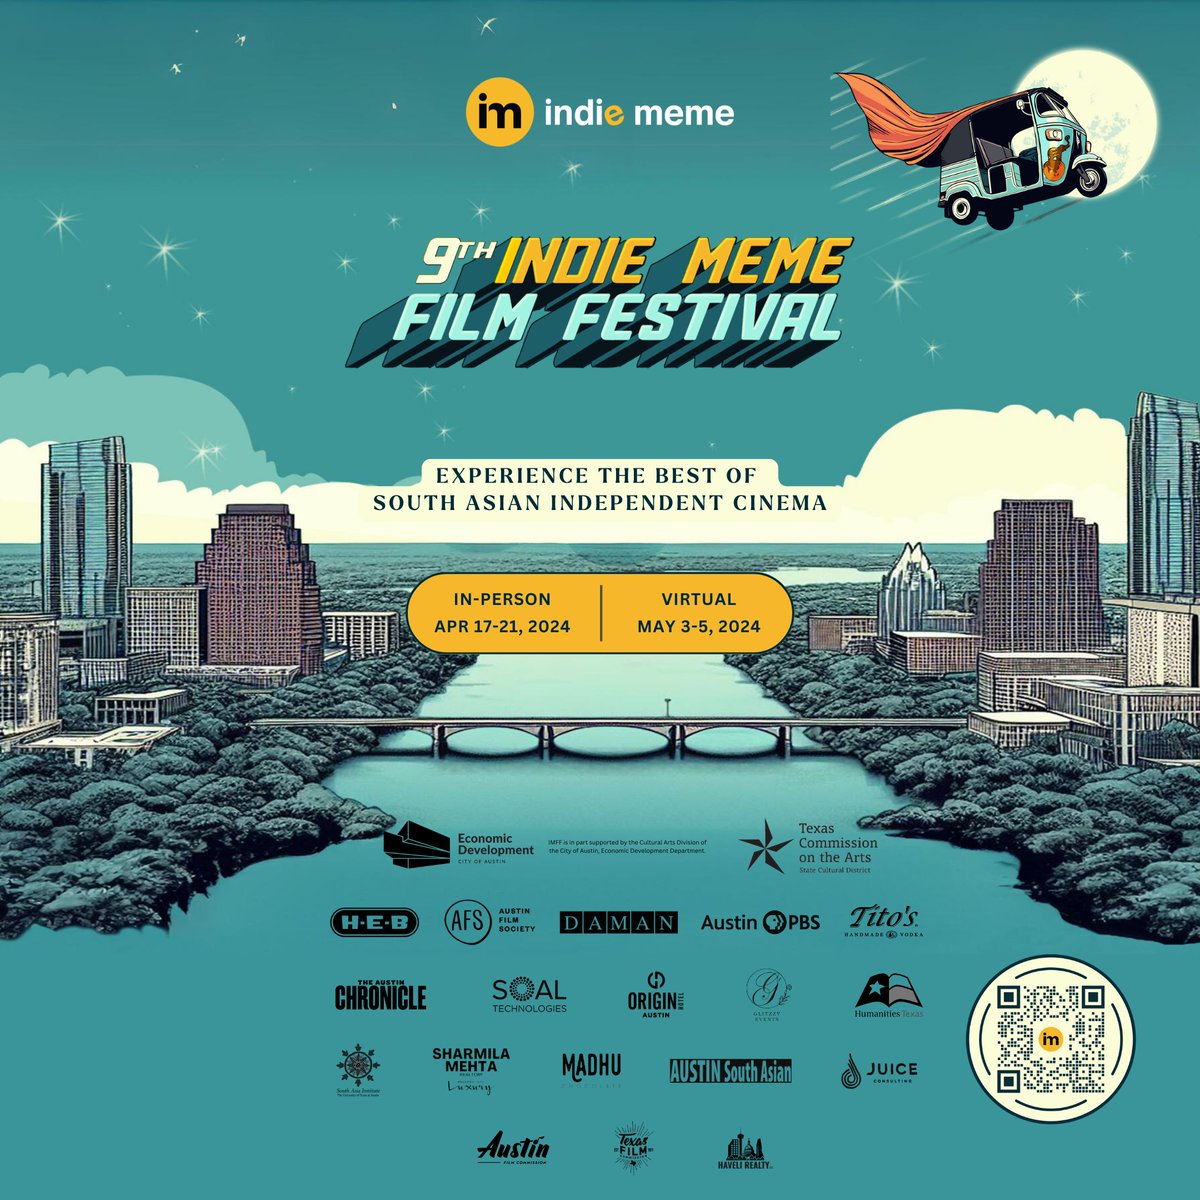 The @indiememe Film Festival kicks off tonight at @austinfilm Cinema!🎥 Head to indiememe.org/imff-2024 for the full schedule, badges/tickets, and more event info. Can't make it to the festival this week? The films will be available to watch virtually May 3-5 💻